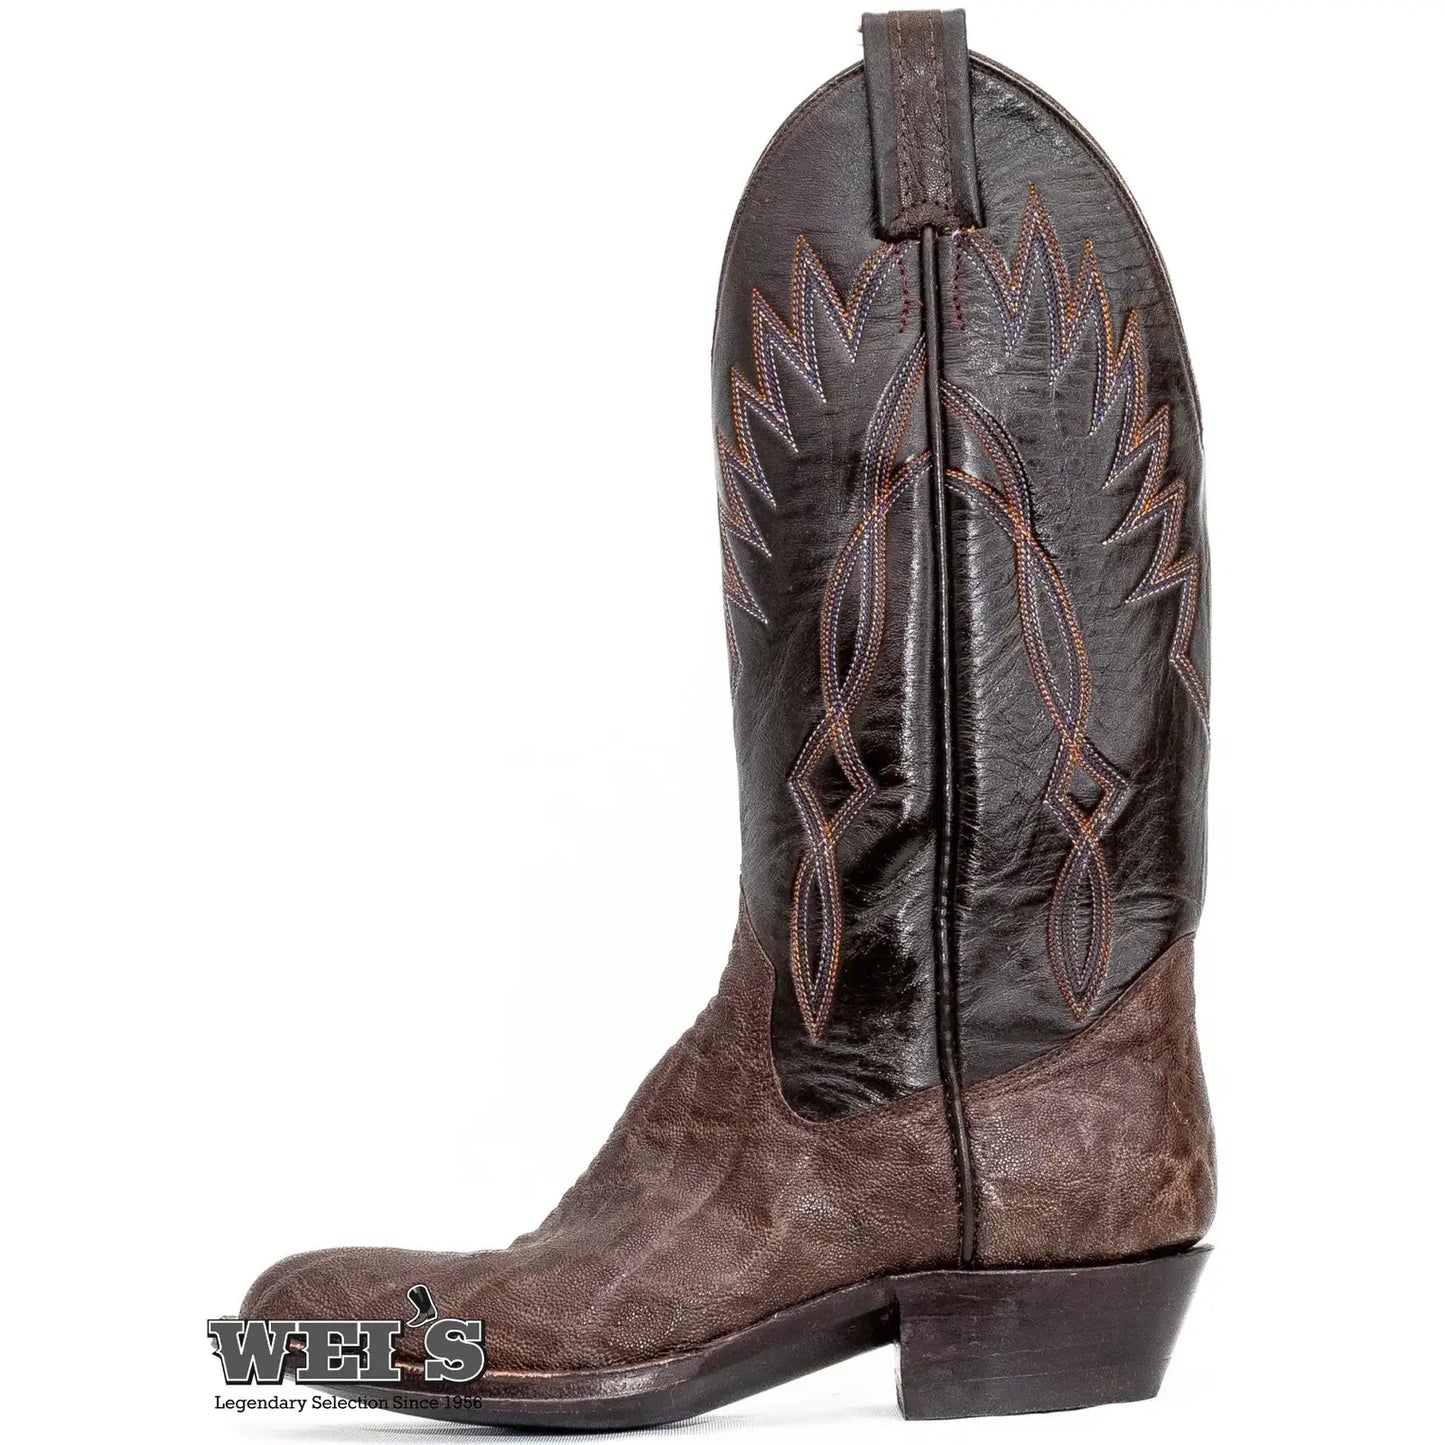 Panhandle Slim Women's Cowgirl Boot 13" Exotic Elephant R-Toe 21Elephant - Panhandle Slim Boots